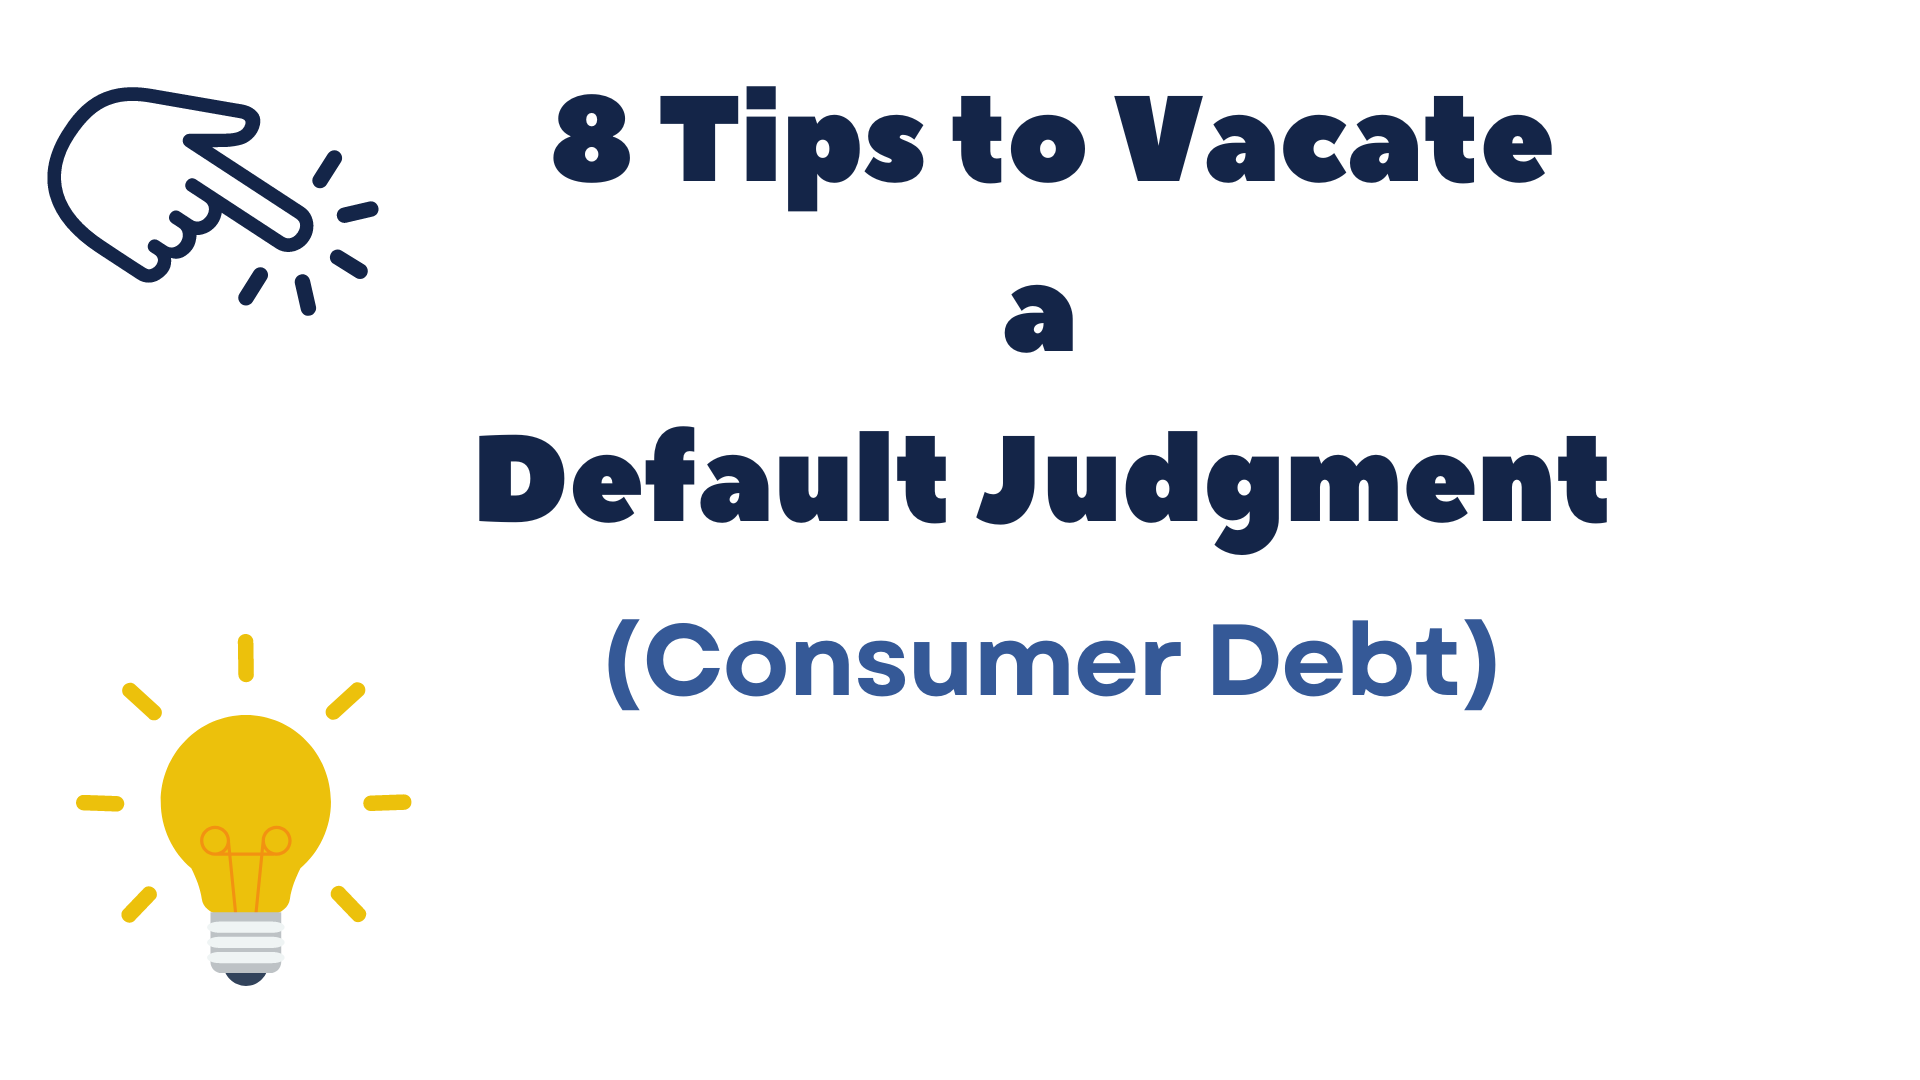 Some tips to vacate a judgment in New York